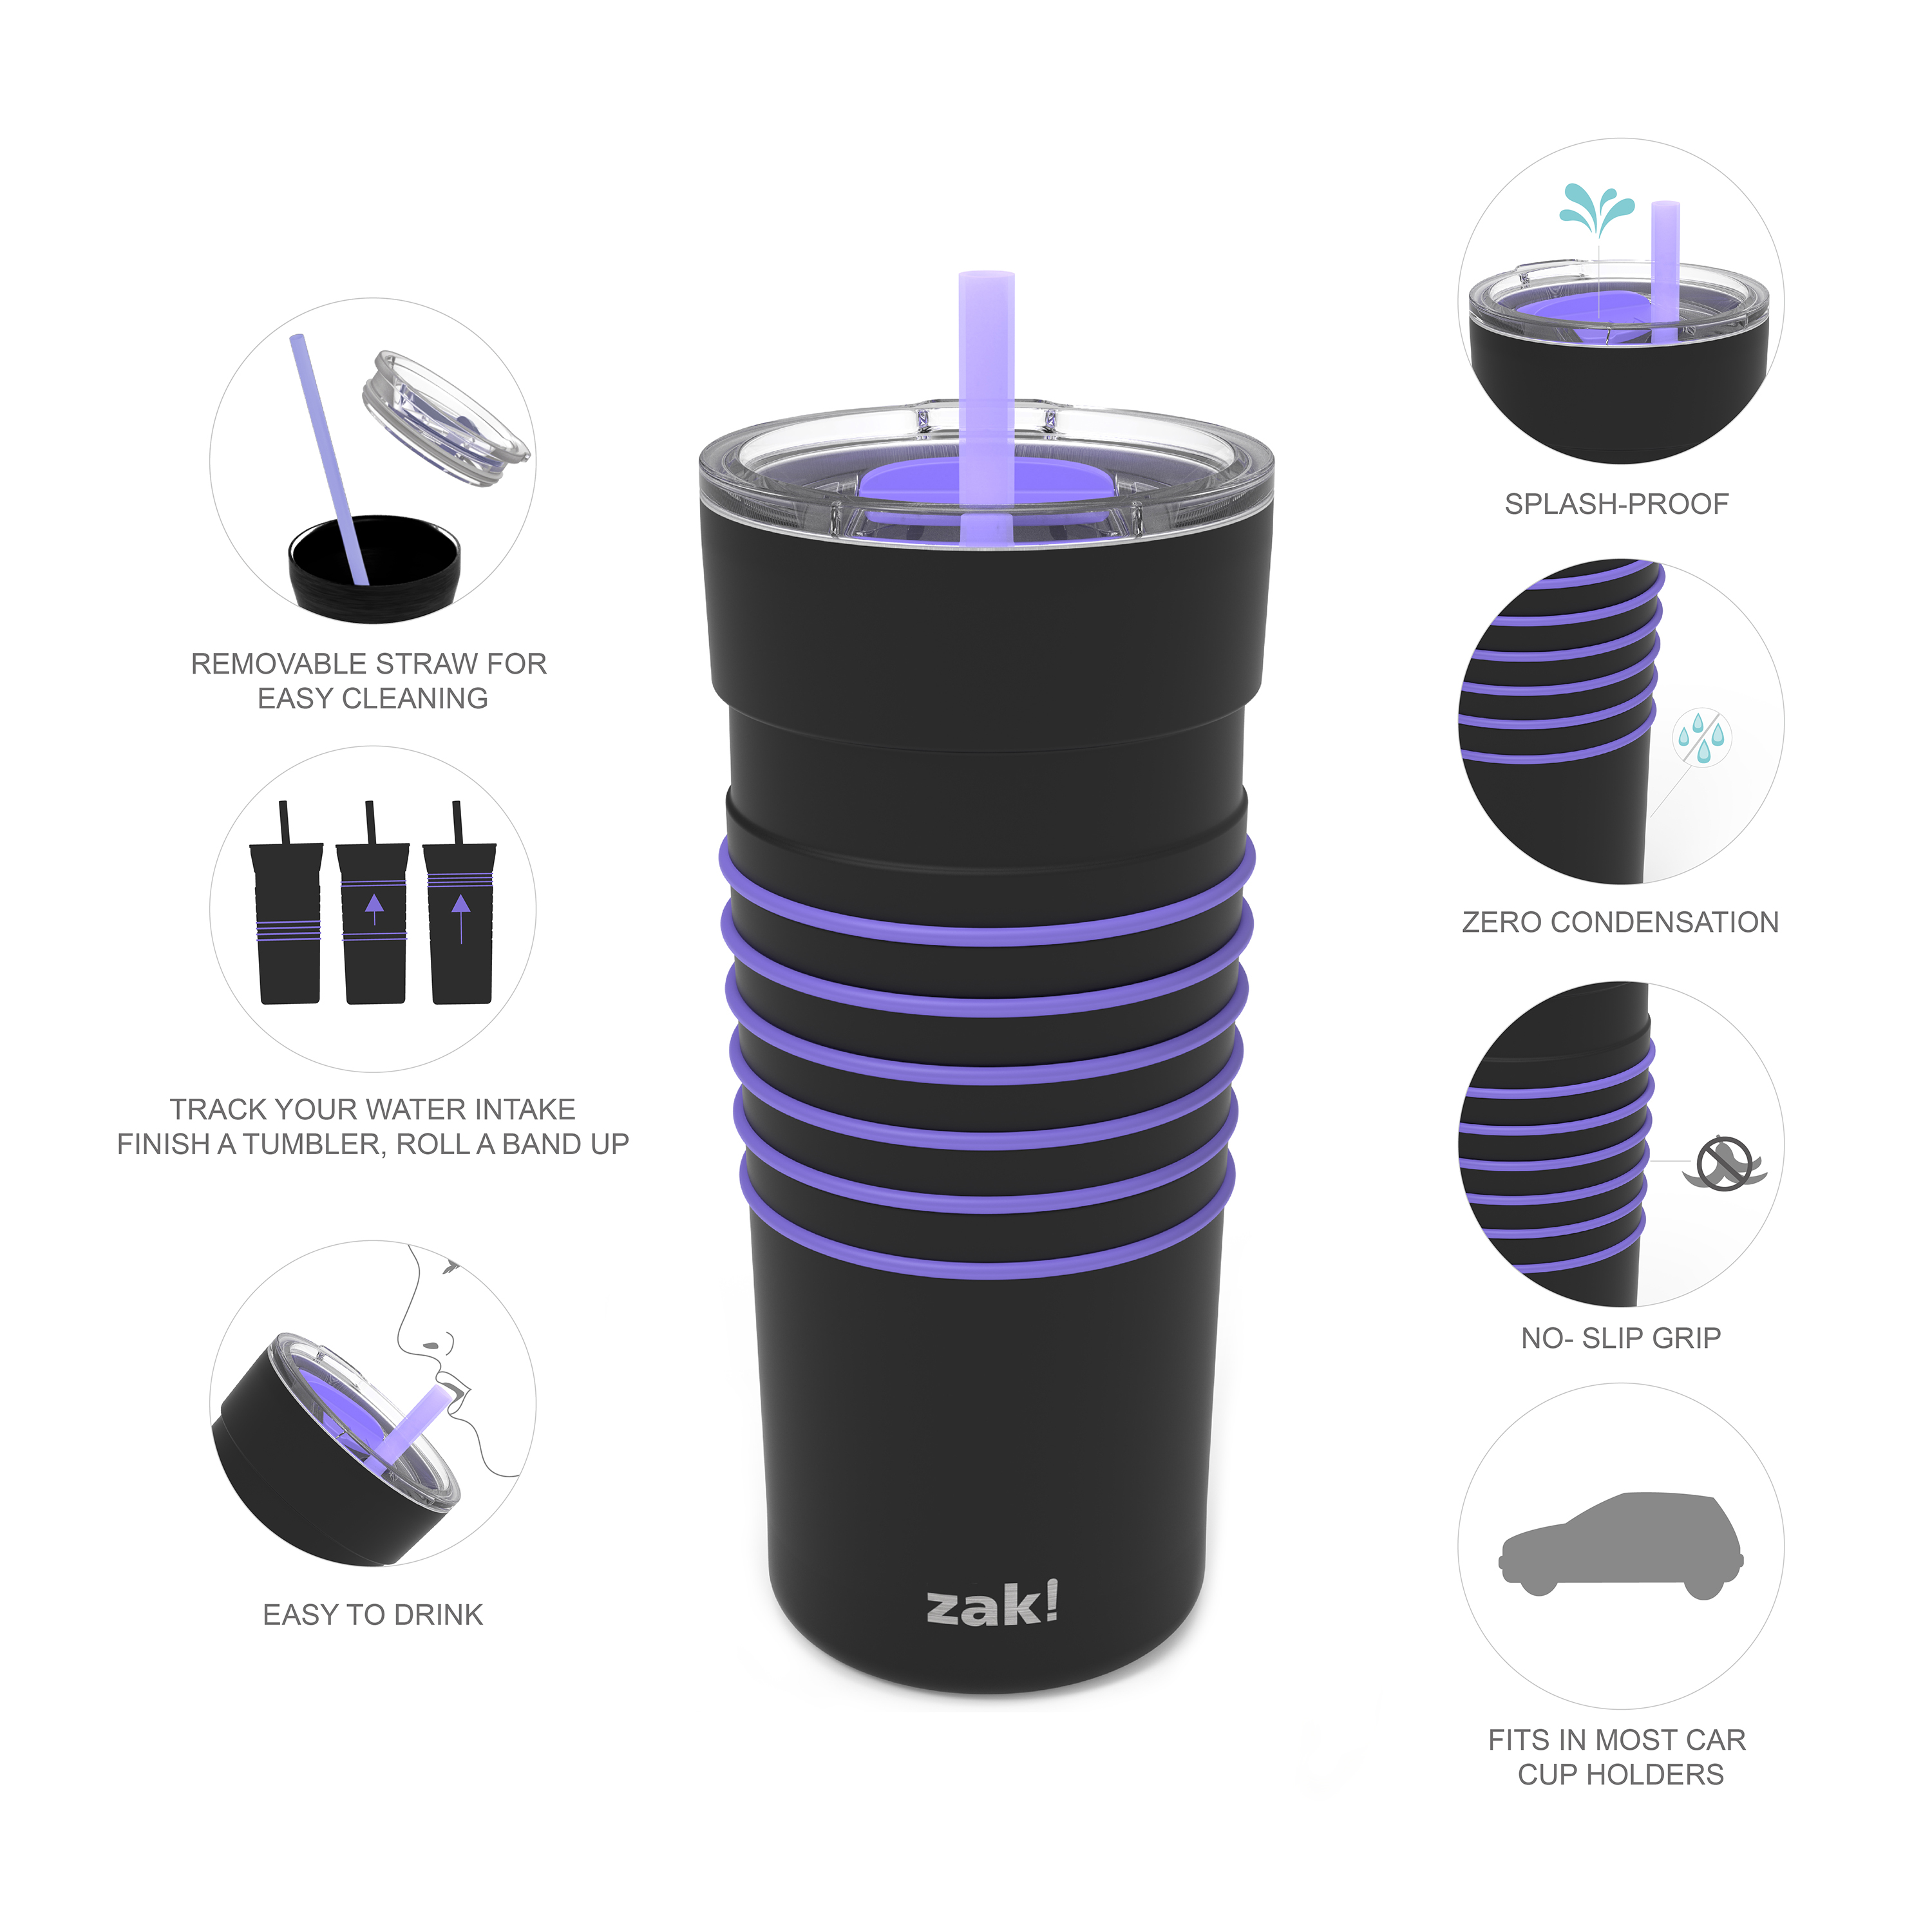 HydraTrak 20 ounce Vacuum Insulated Stainless Steel Tumbler, Black with Purple Rings slideshow image 8